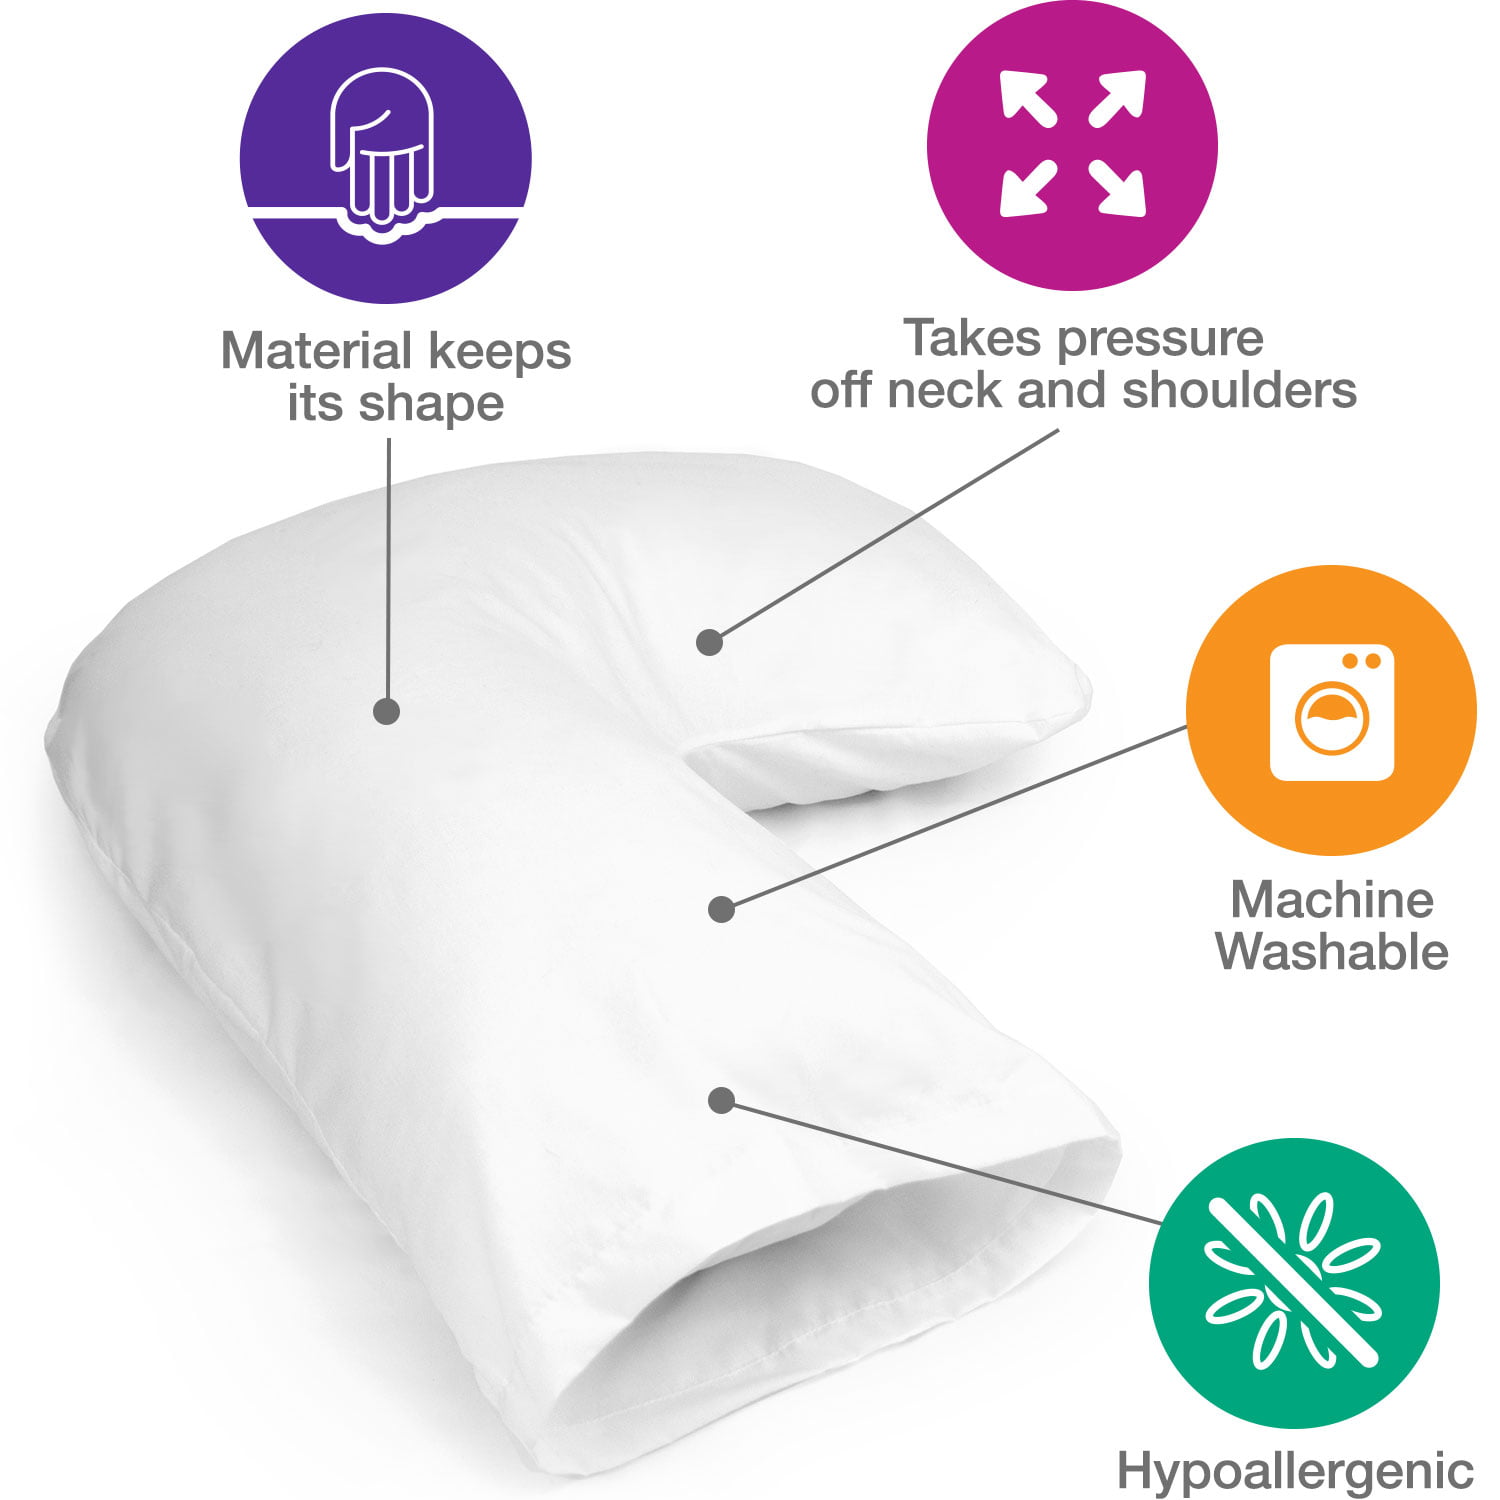 Wenyun Side Sleeper Pillow U Shaped Contour Pillow: Cool Firm Hypoallergenic Orthopedic Pillow Fit for Neck Support Shoulder Back/Neck Pain Relief 